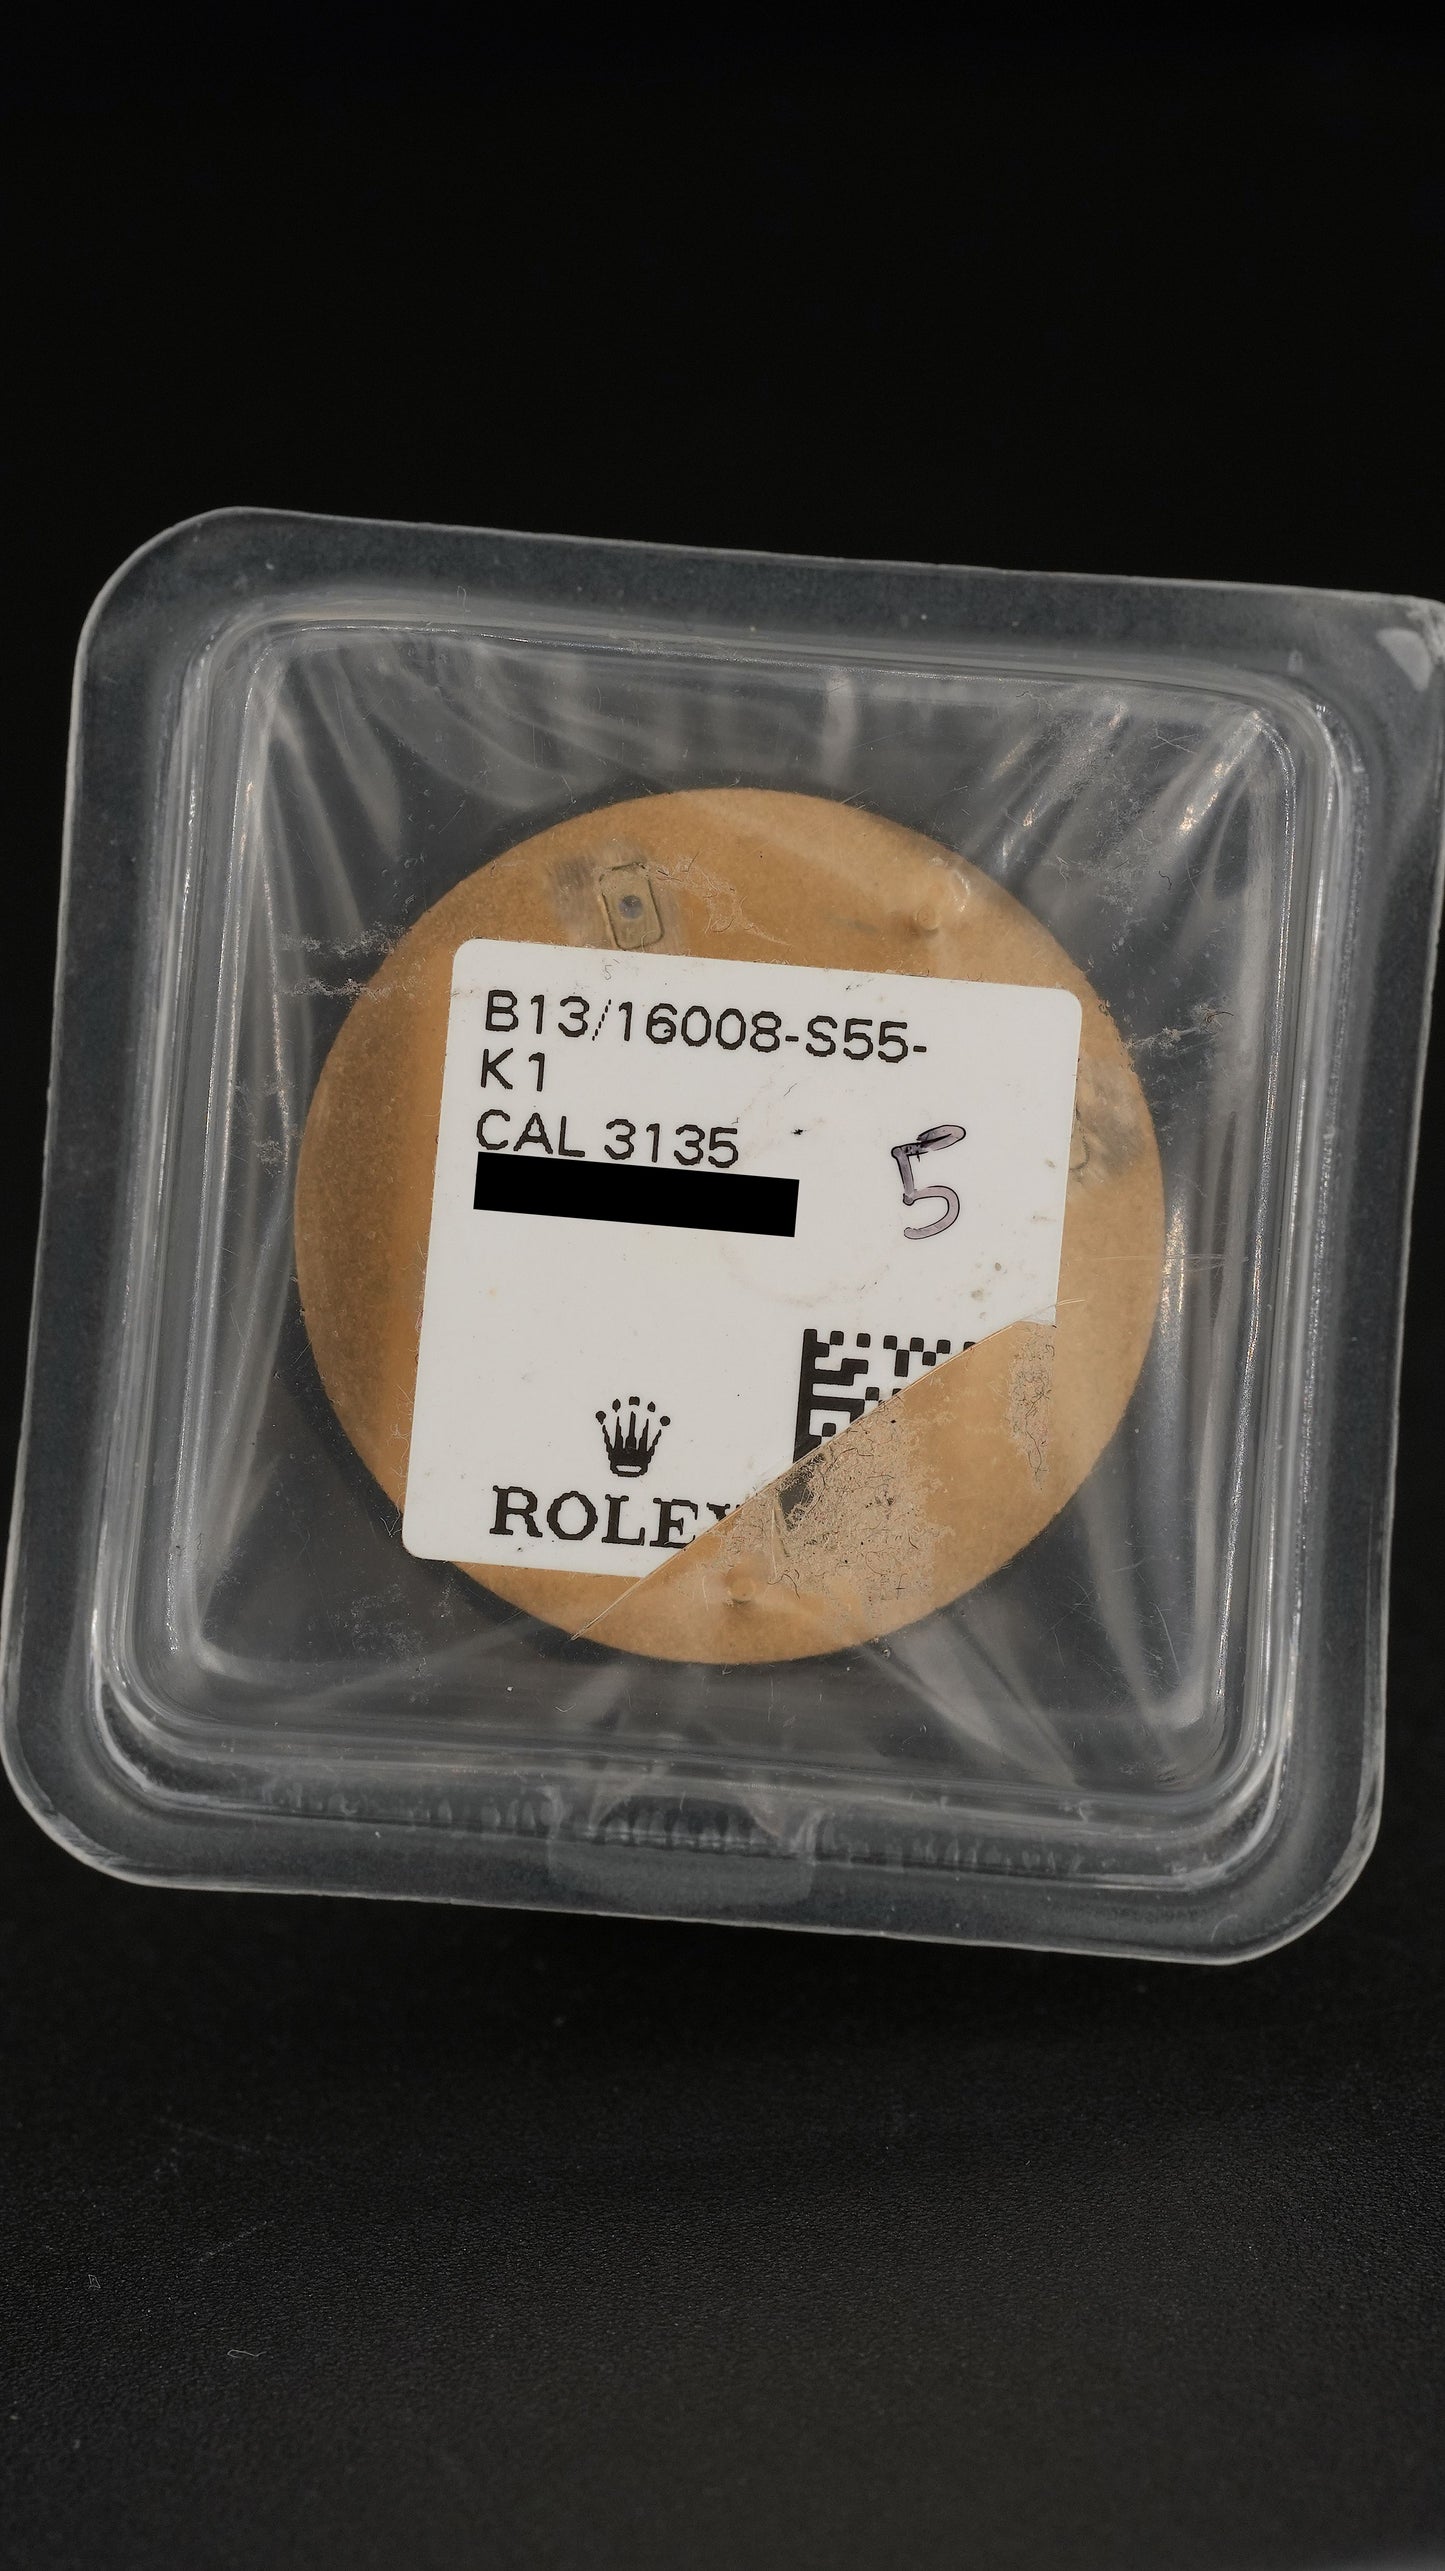 Rolex NOS Onyx dial for OP Datejust 36mm | 16013 | 16018 | 16233 | 16238 | 116233 in blister